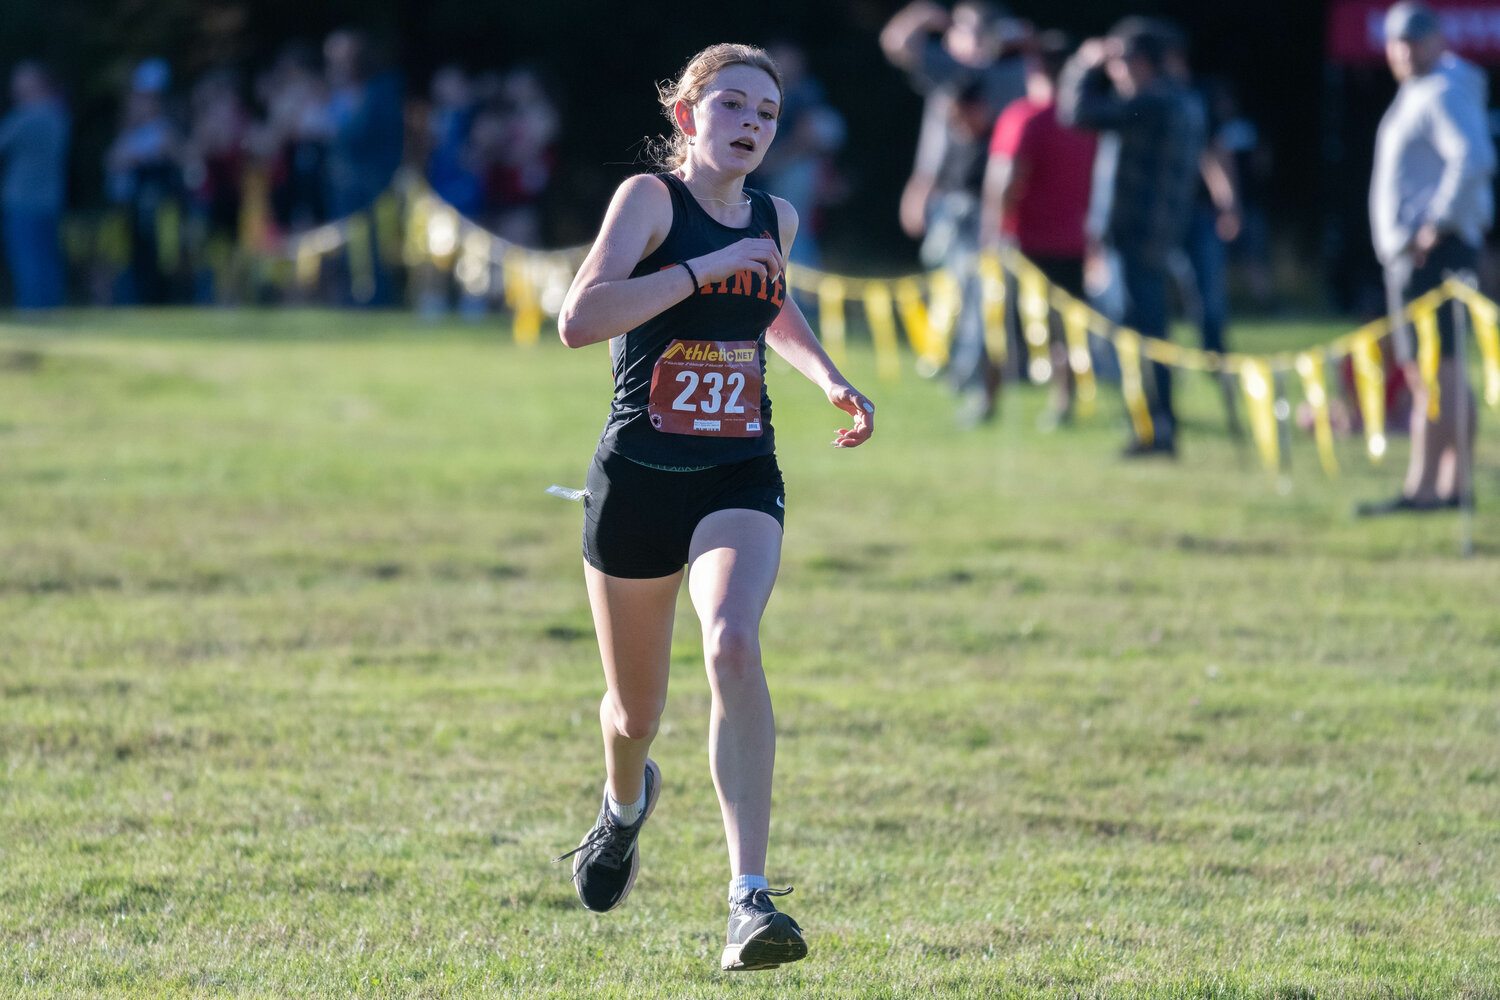 Rayanna Wisner crosses the finish line in the girls' race at the C2BL championship meet in Onalaska on Oct. 19.